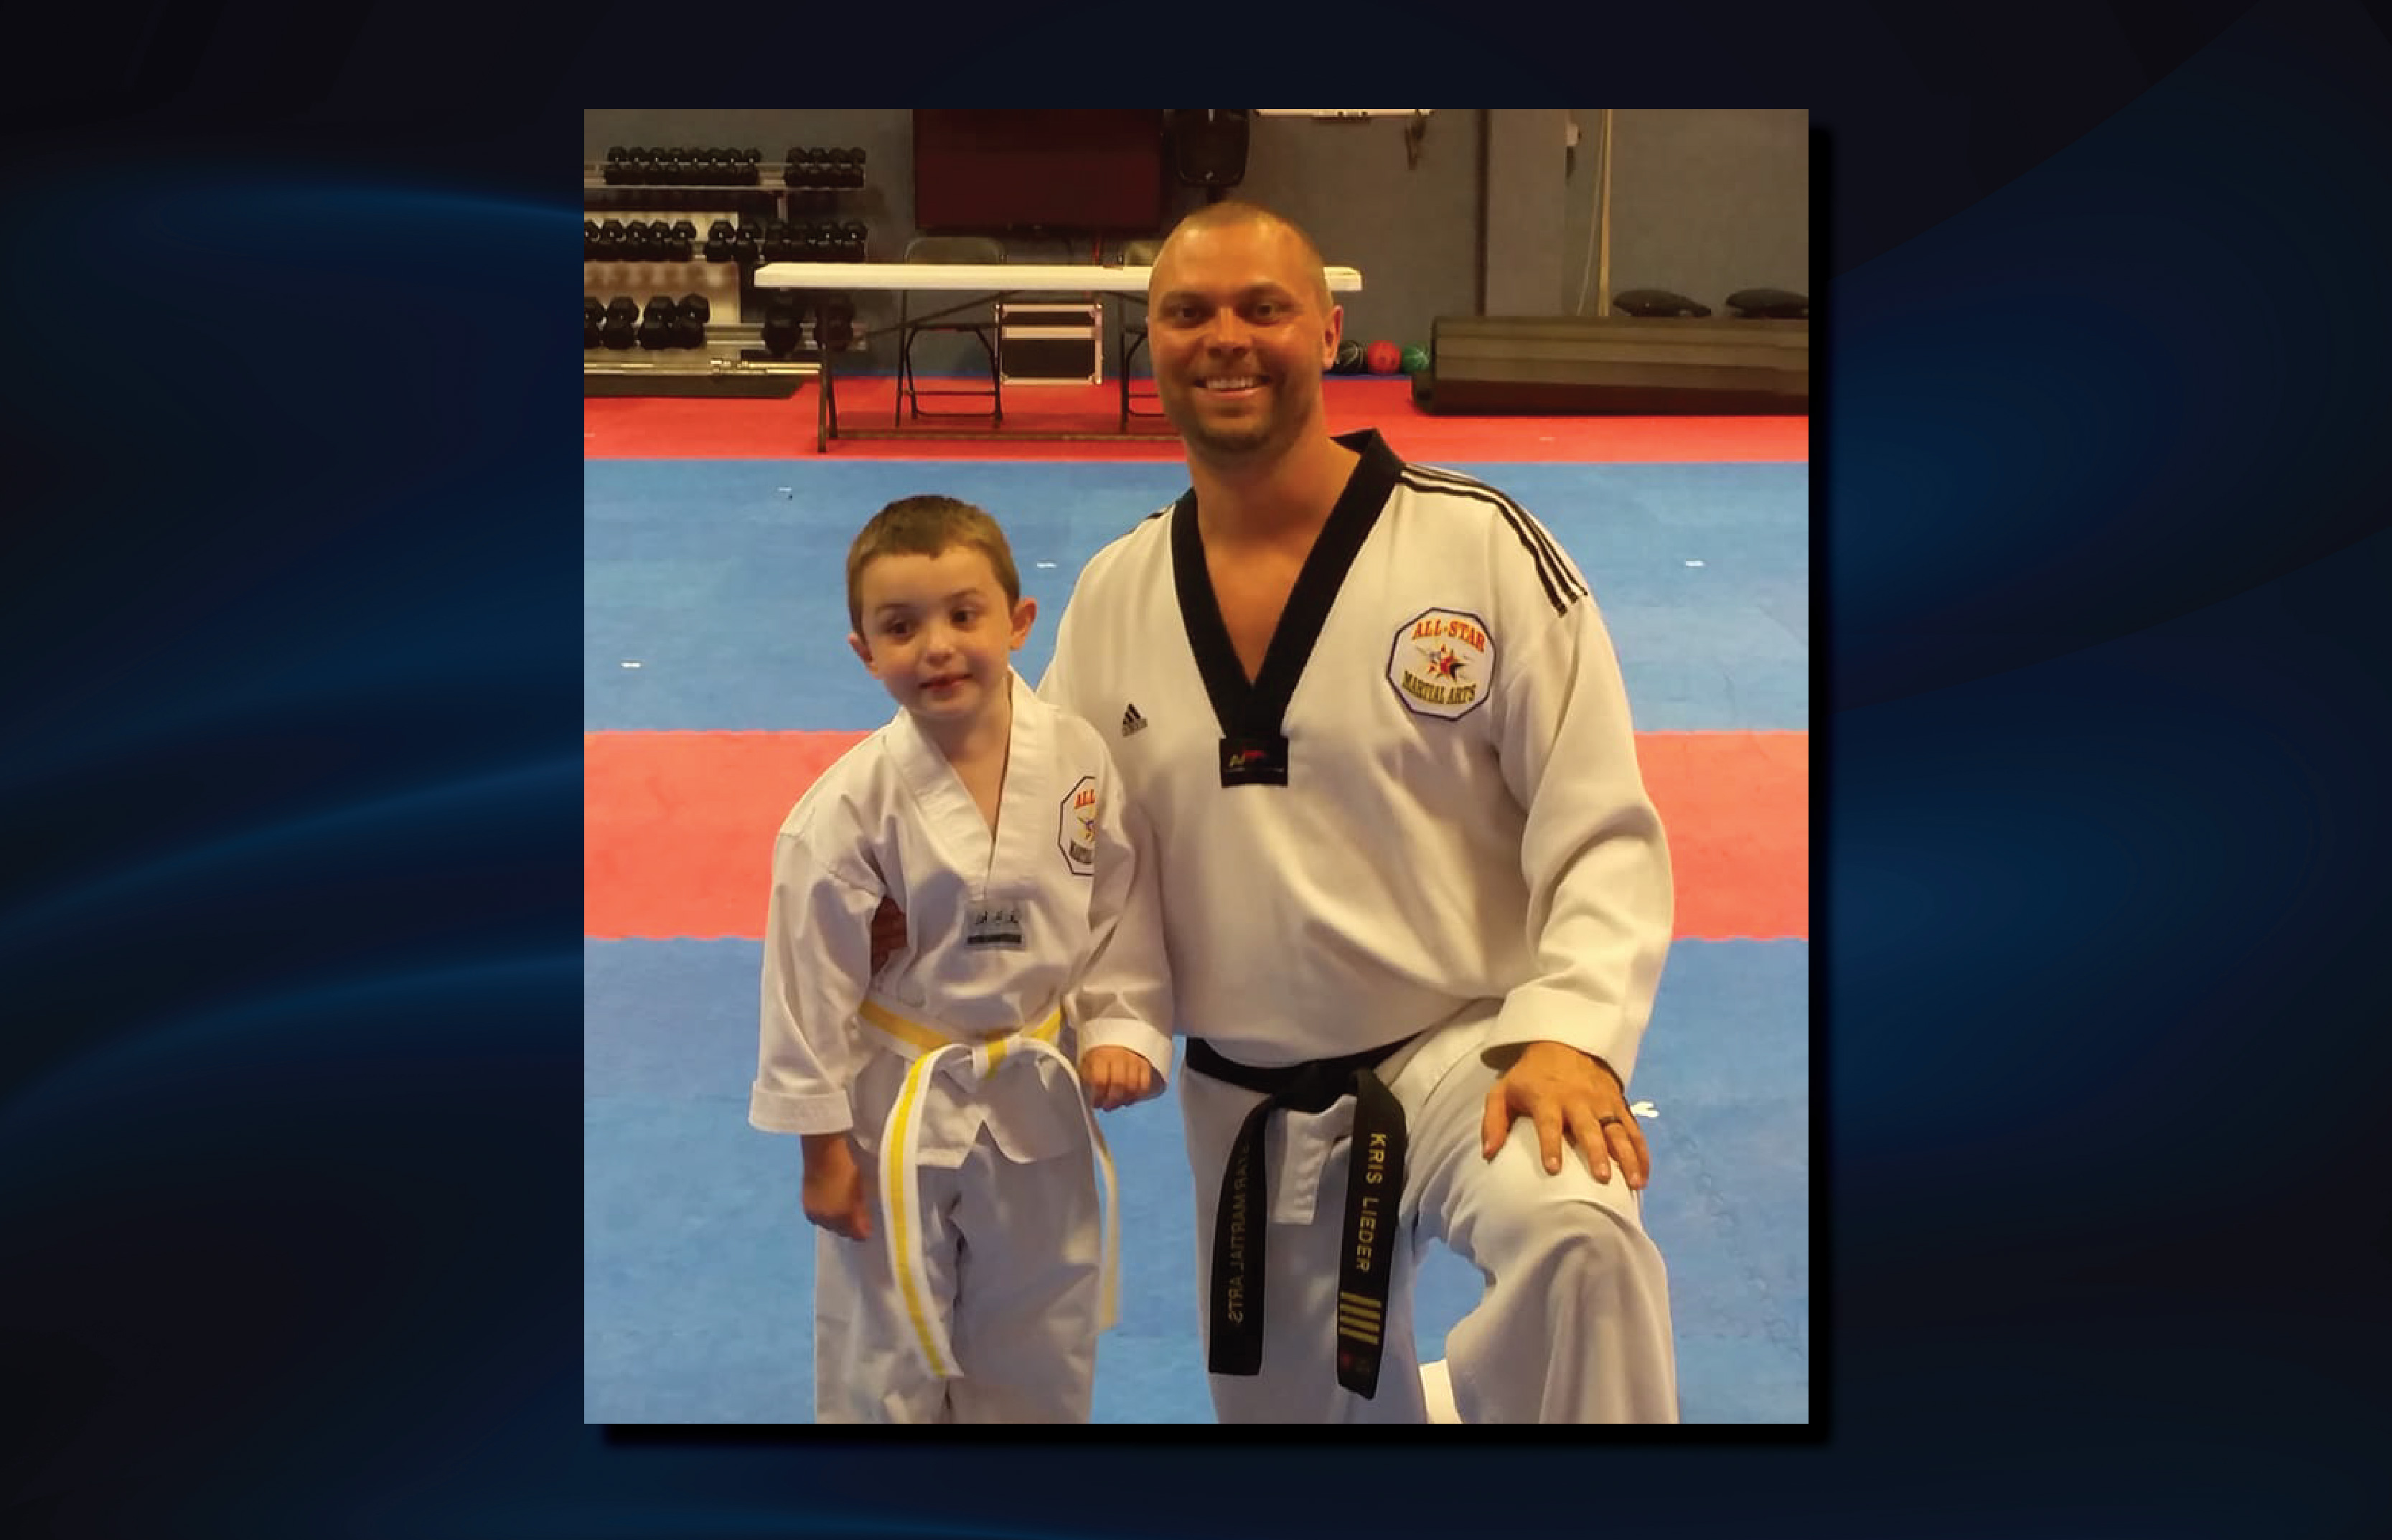 Local Martial Arts Master to Speak at Tomball Lions Club Meeting This Friday